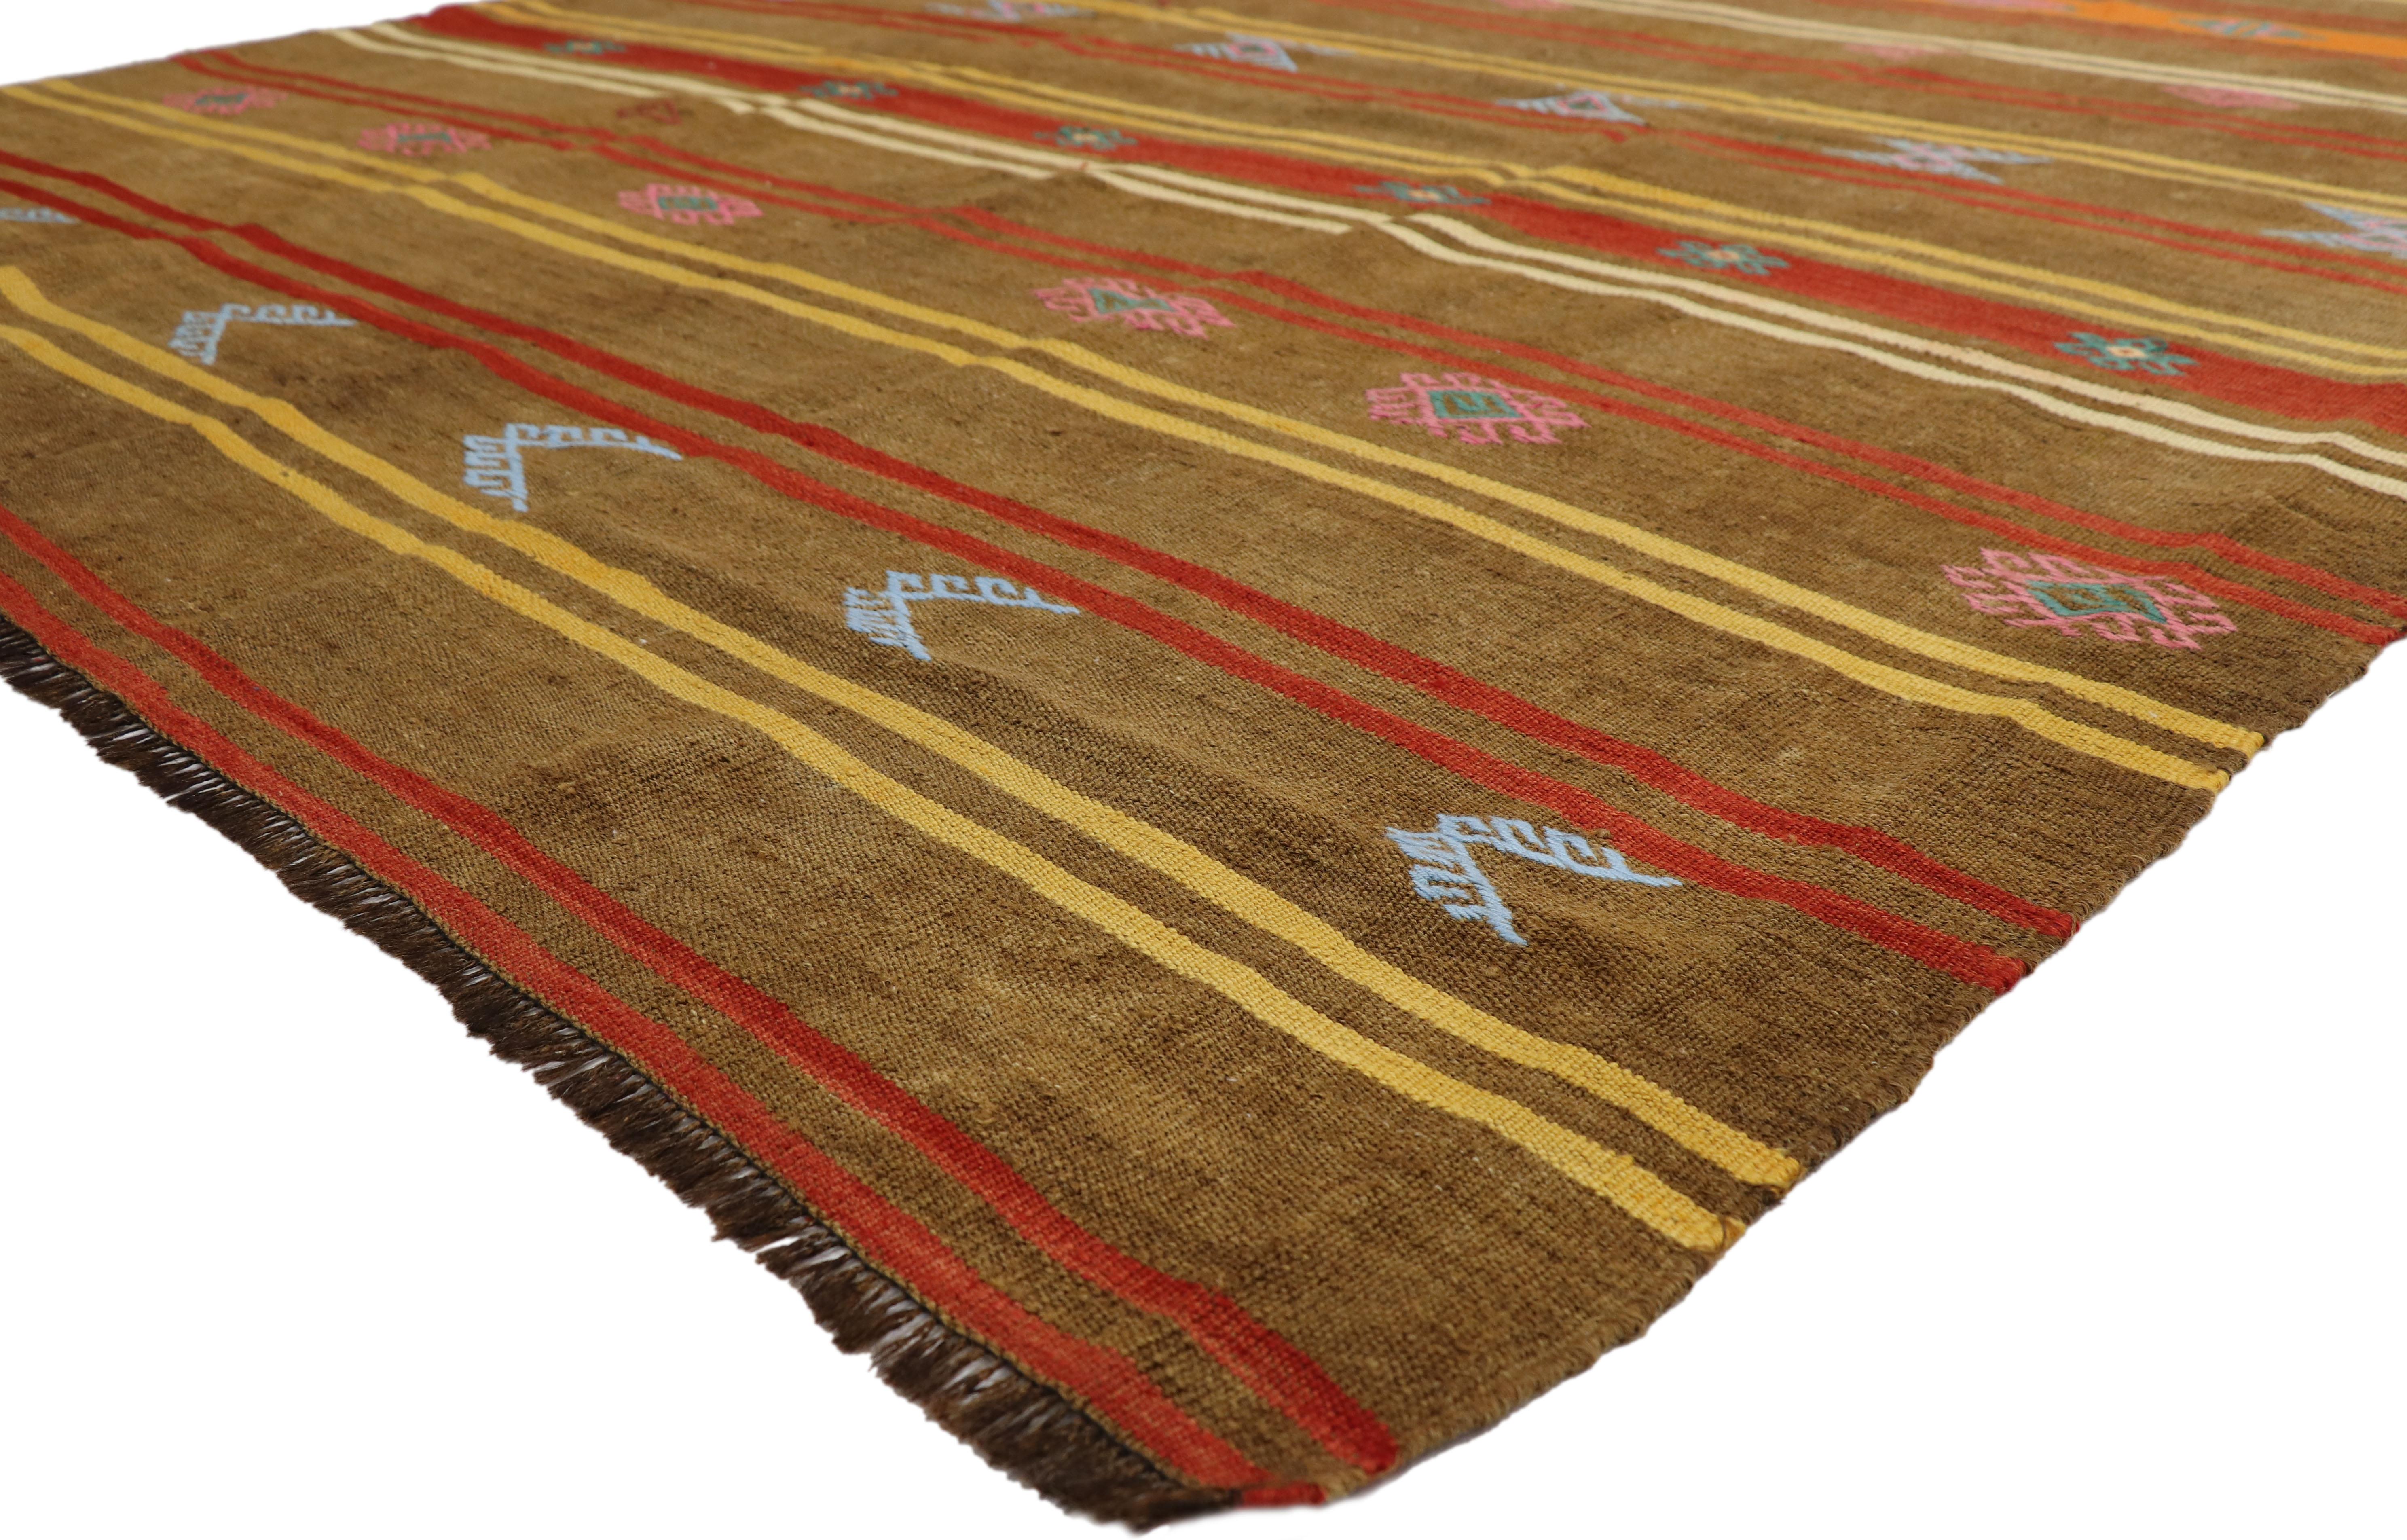 51079 Vintage Turkish Kilim Rug with Bohemian Tribal Design and Modern Cabin Style 07'06 x 12'09. Create a comfortable and modern setting with this hand-woven wool vintage Turkish Kilim rug. The flat-weave kilim rug features symbolic tribal motifs